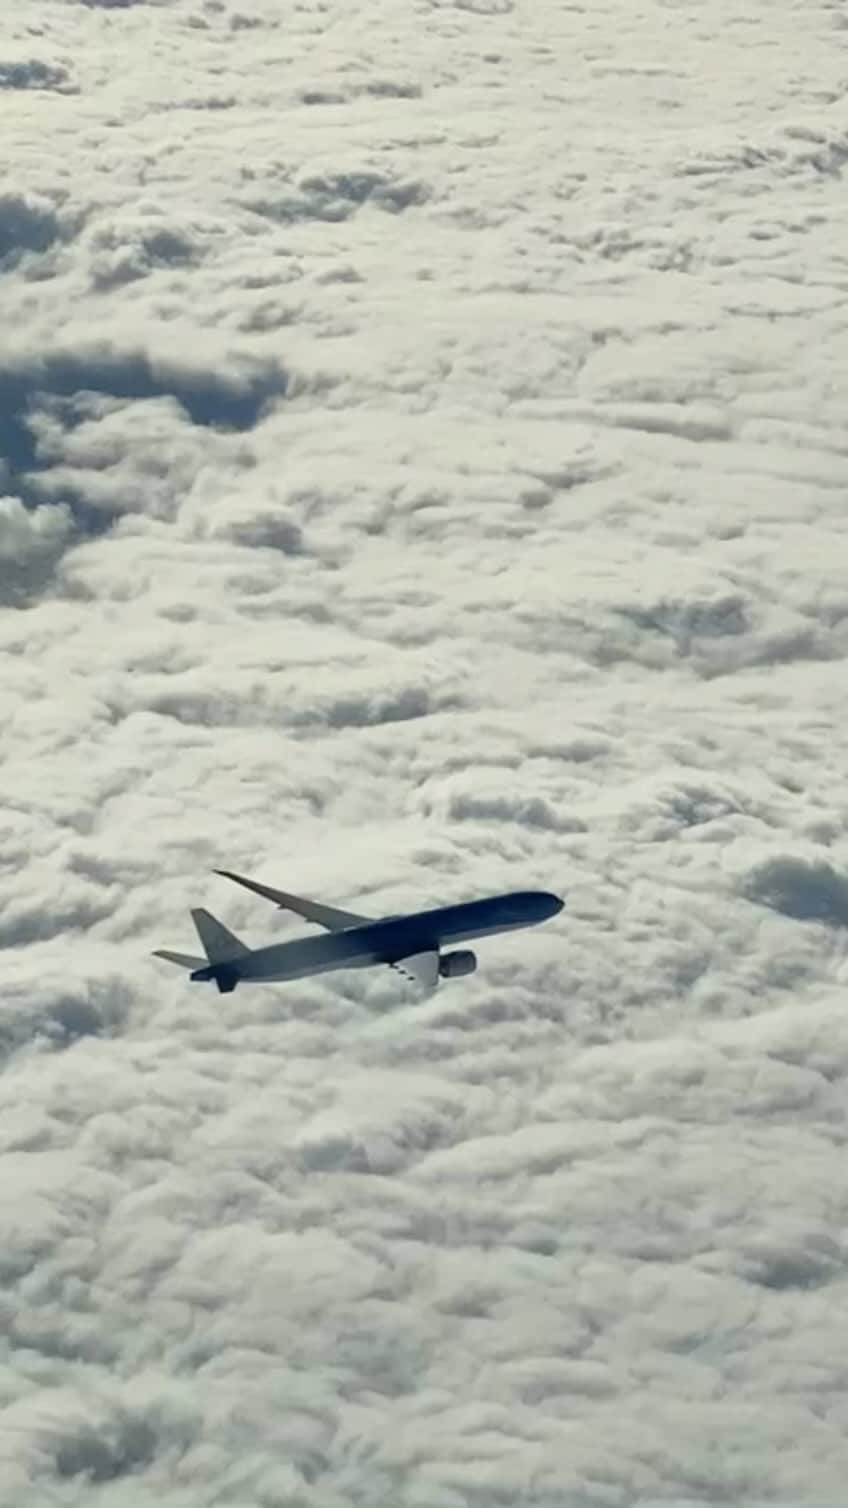 KLMオランダ航空のインスタグラム：「Cloudsurfing friends. ⛅️✈️ That moment when you spot another KLM plane next to you! 💕  🎥: @esther.sturrus   #KLM #royaldutchairlines #boeing777 #avgeek #clouds #planes #aviation #cloud #planespotting」